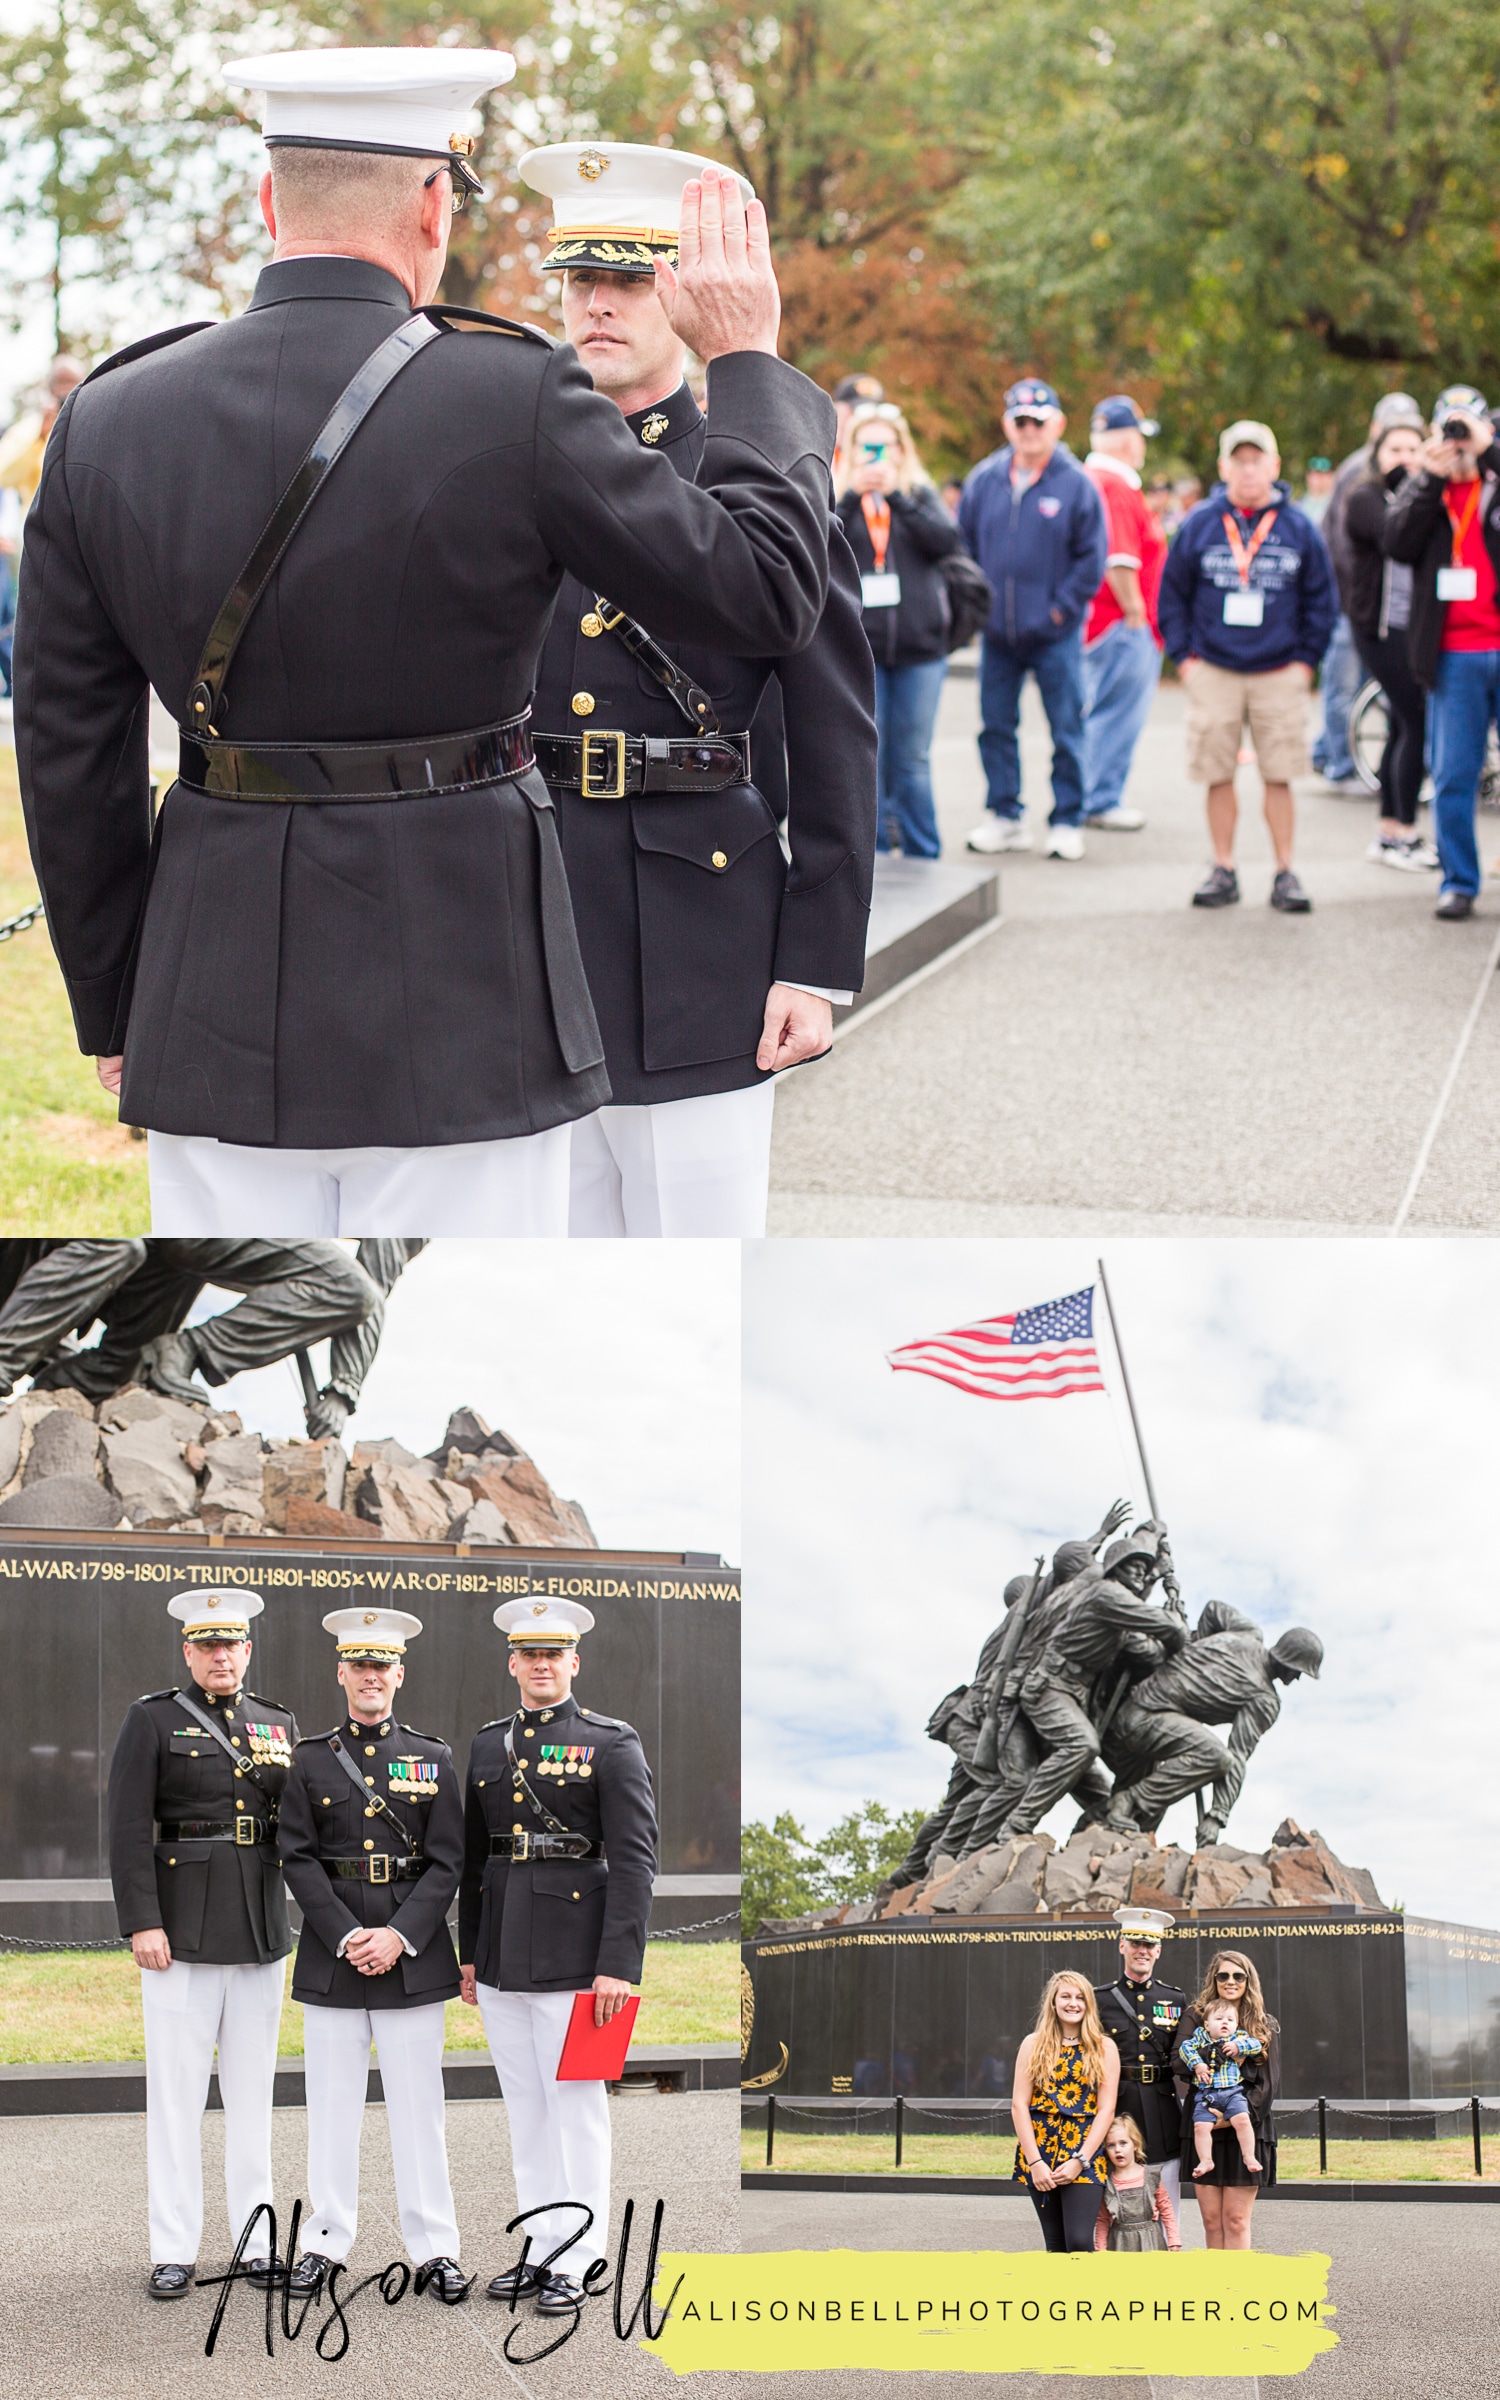 Marine Corps Promotion pinning ceremony at US Marine Corps War Memorial Iwo Jima Washington, DC by Alison Bell, Photographer. Military Ceremony photography